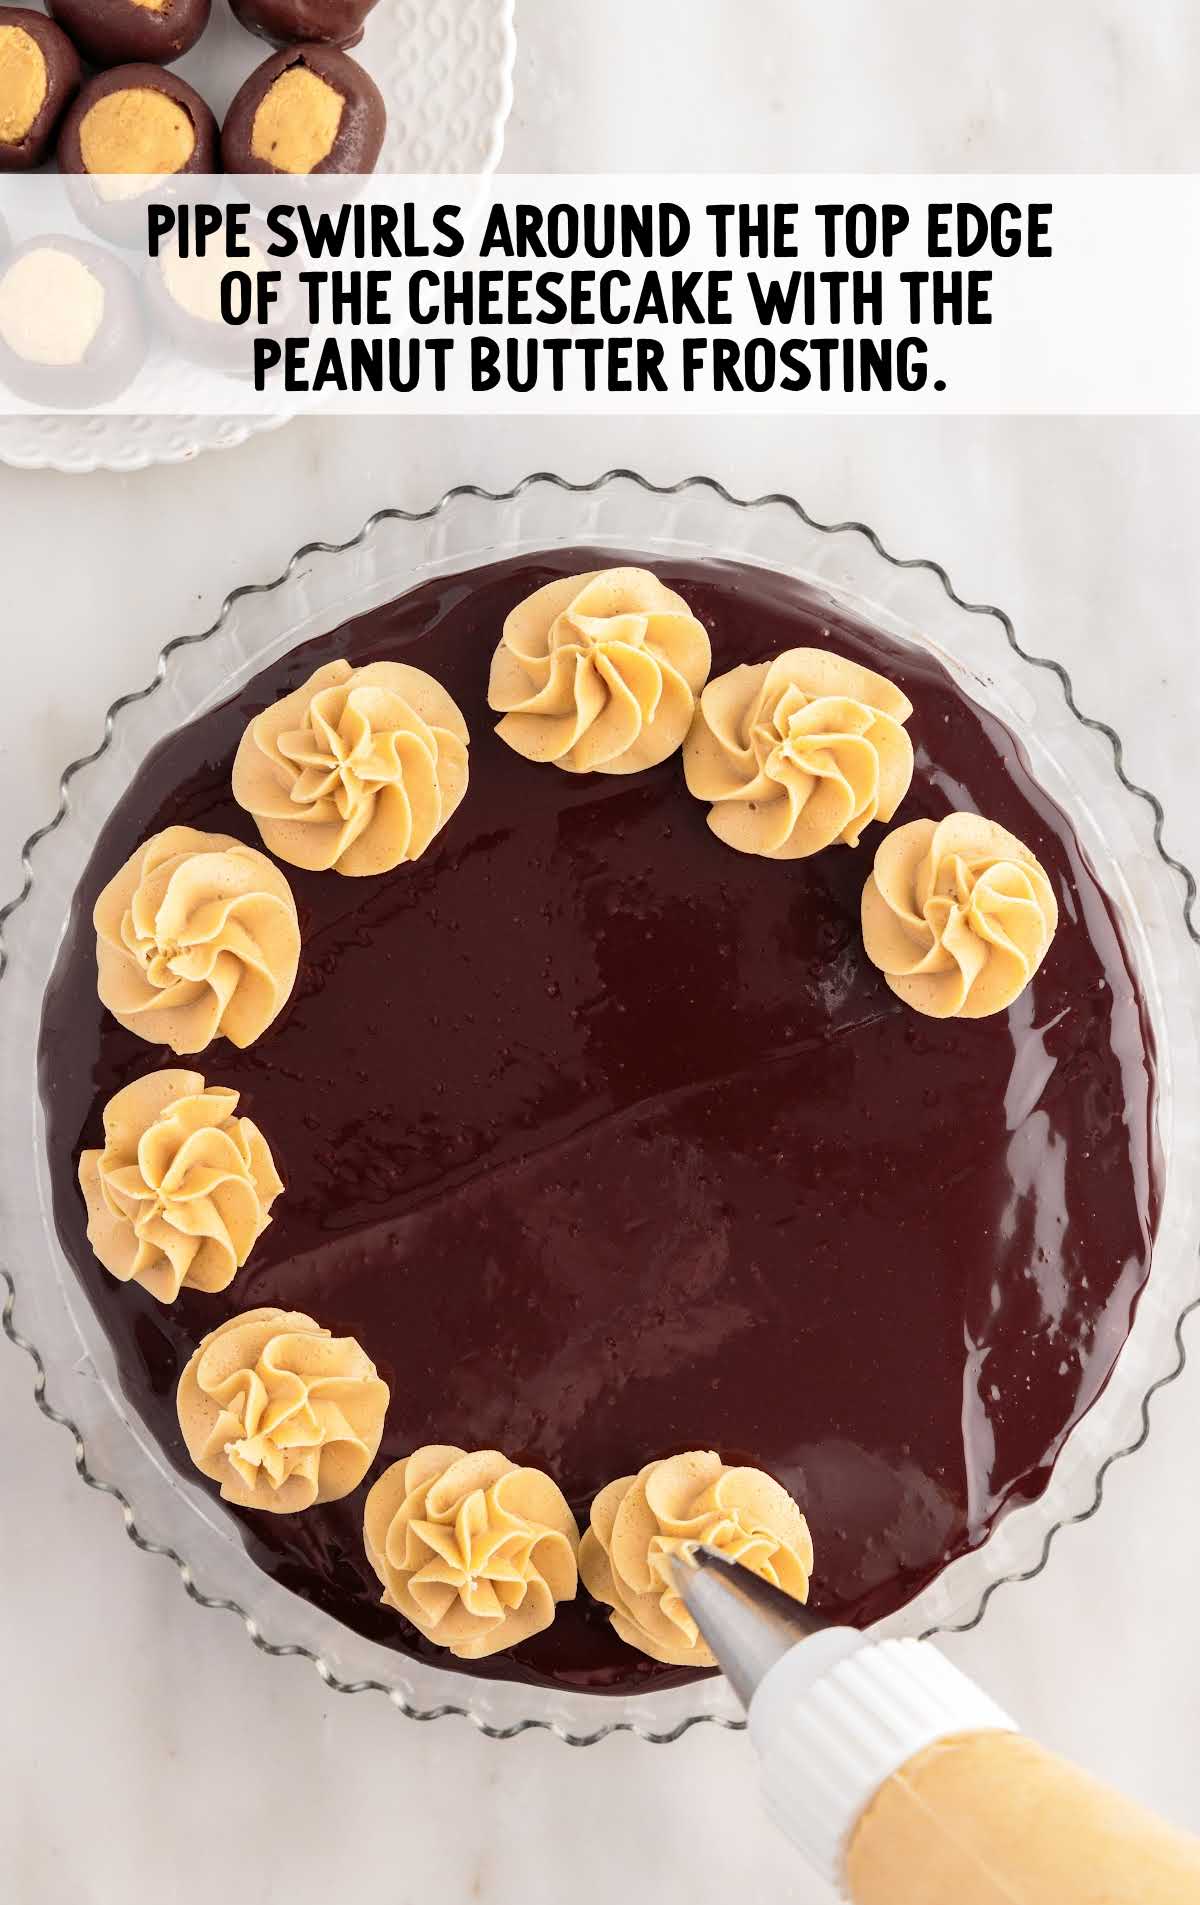 swirls piped around the top edges of the cheesecake with the peanut butter frosting